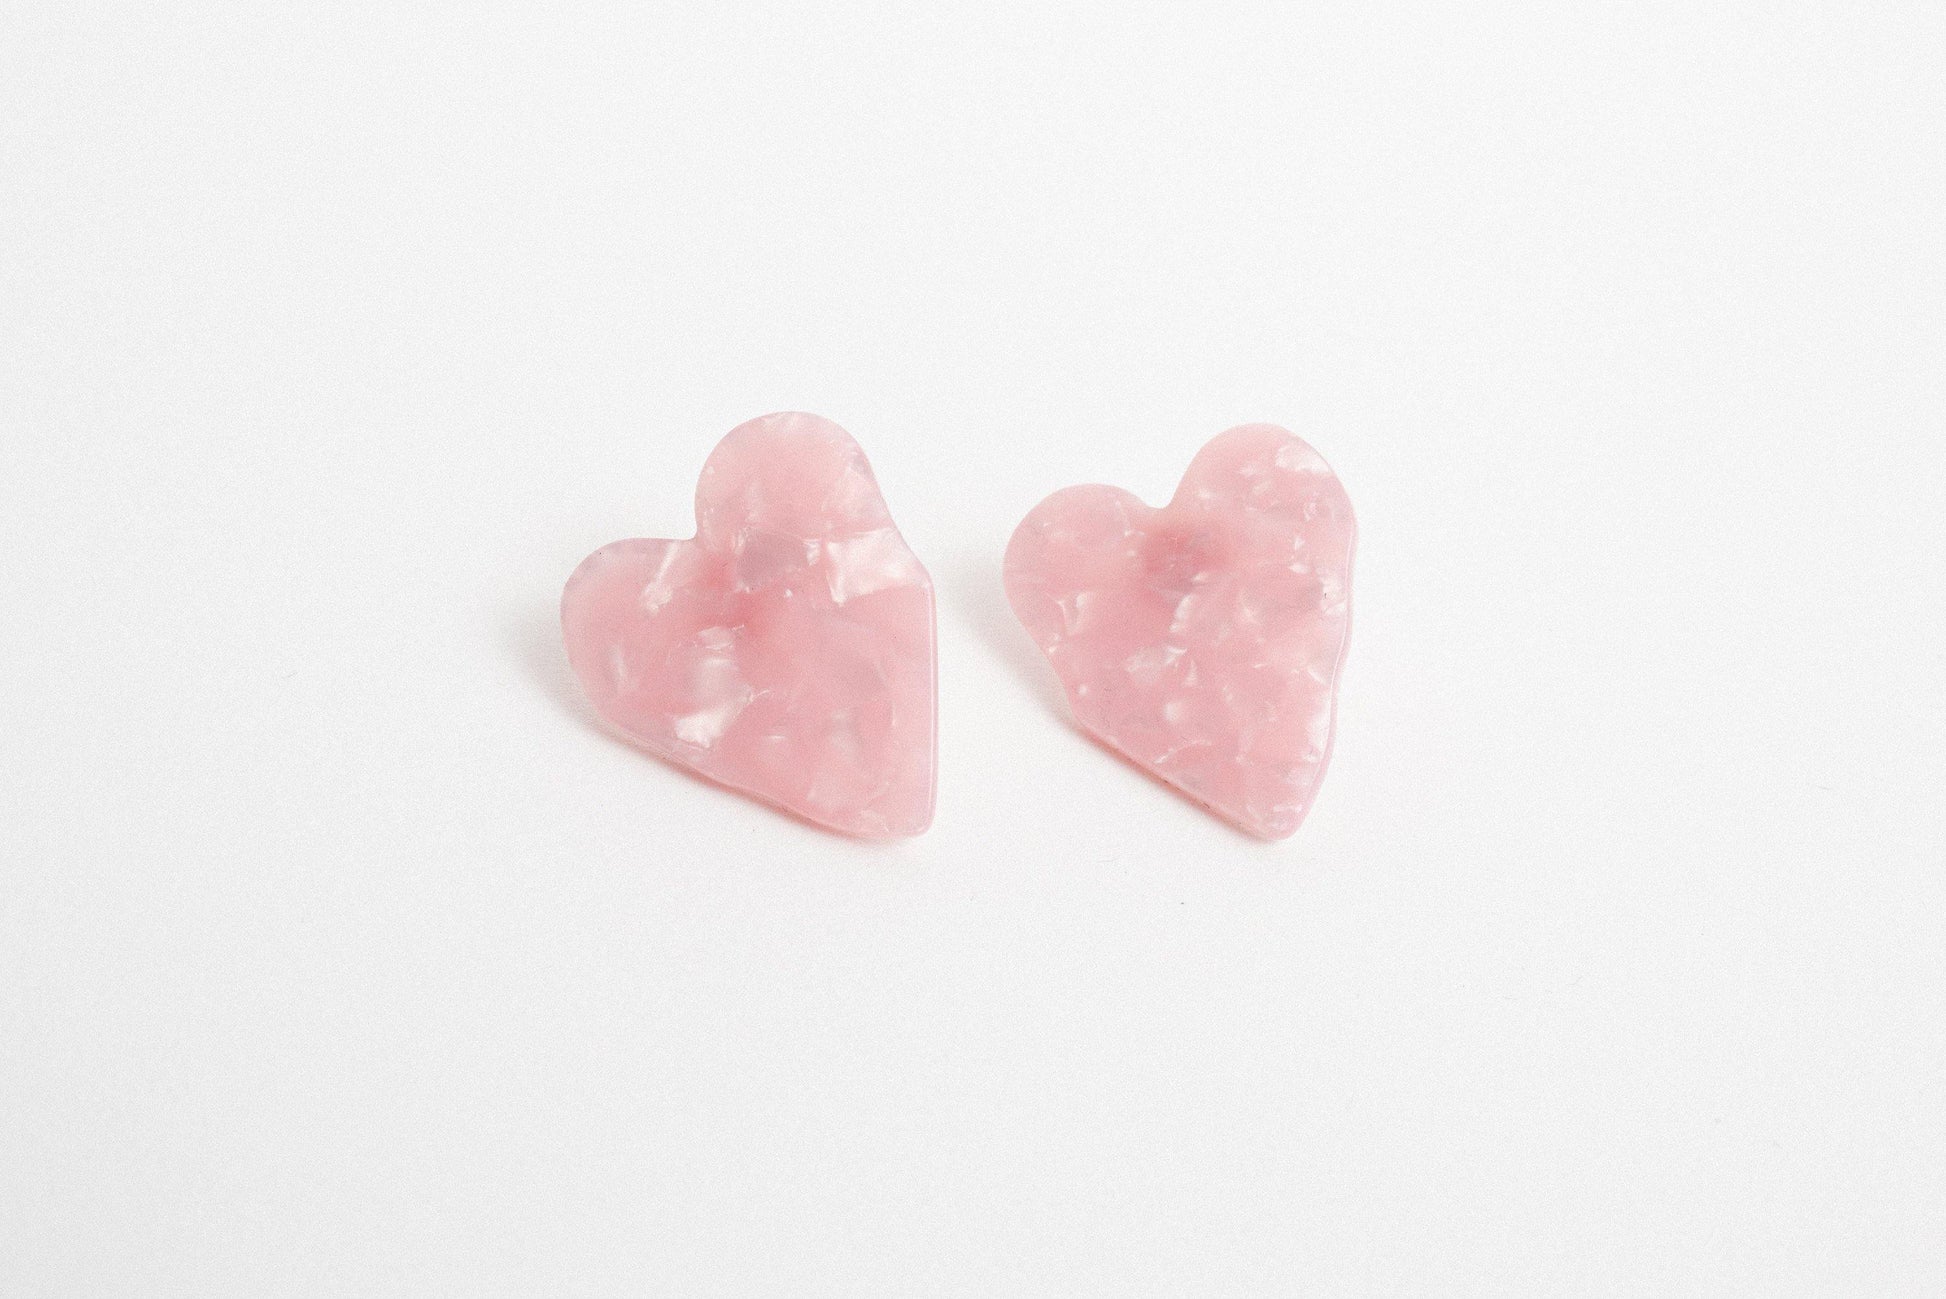 Strawberry Cream Heart Earrings - Closed Caption | Shop Vintage + Handmade. Always Sustainable. Never Wasteful.